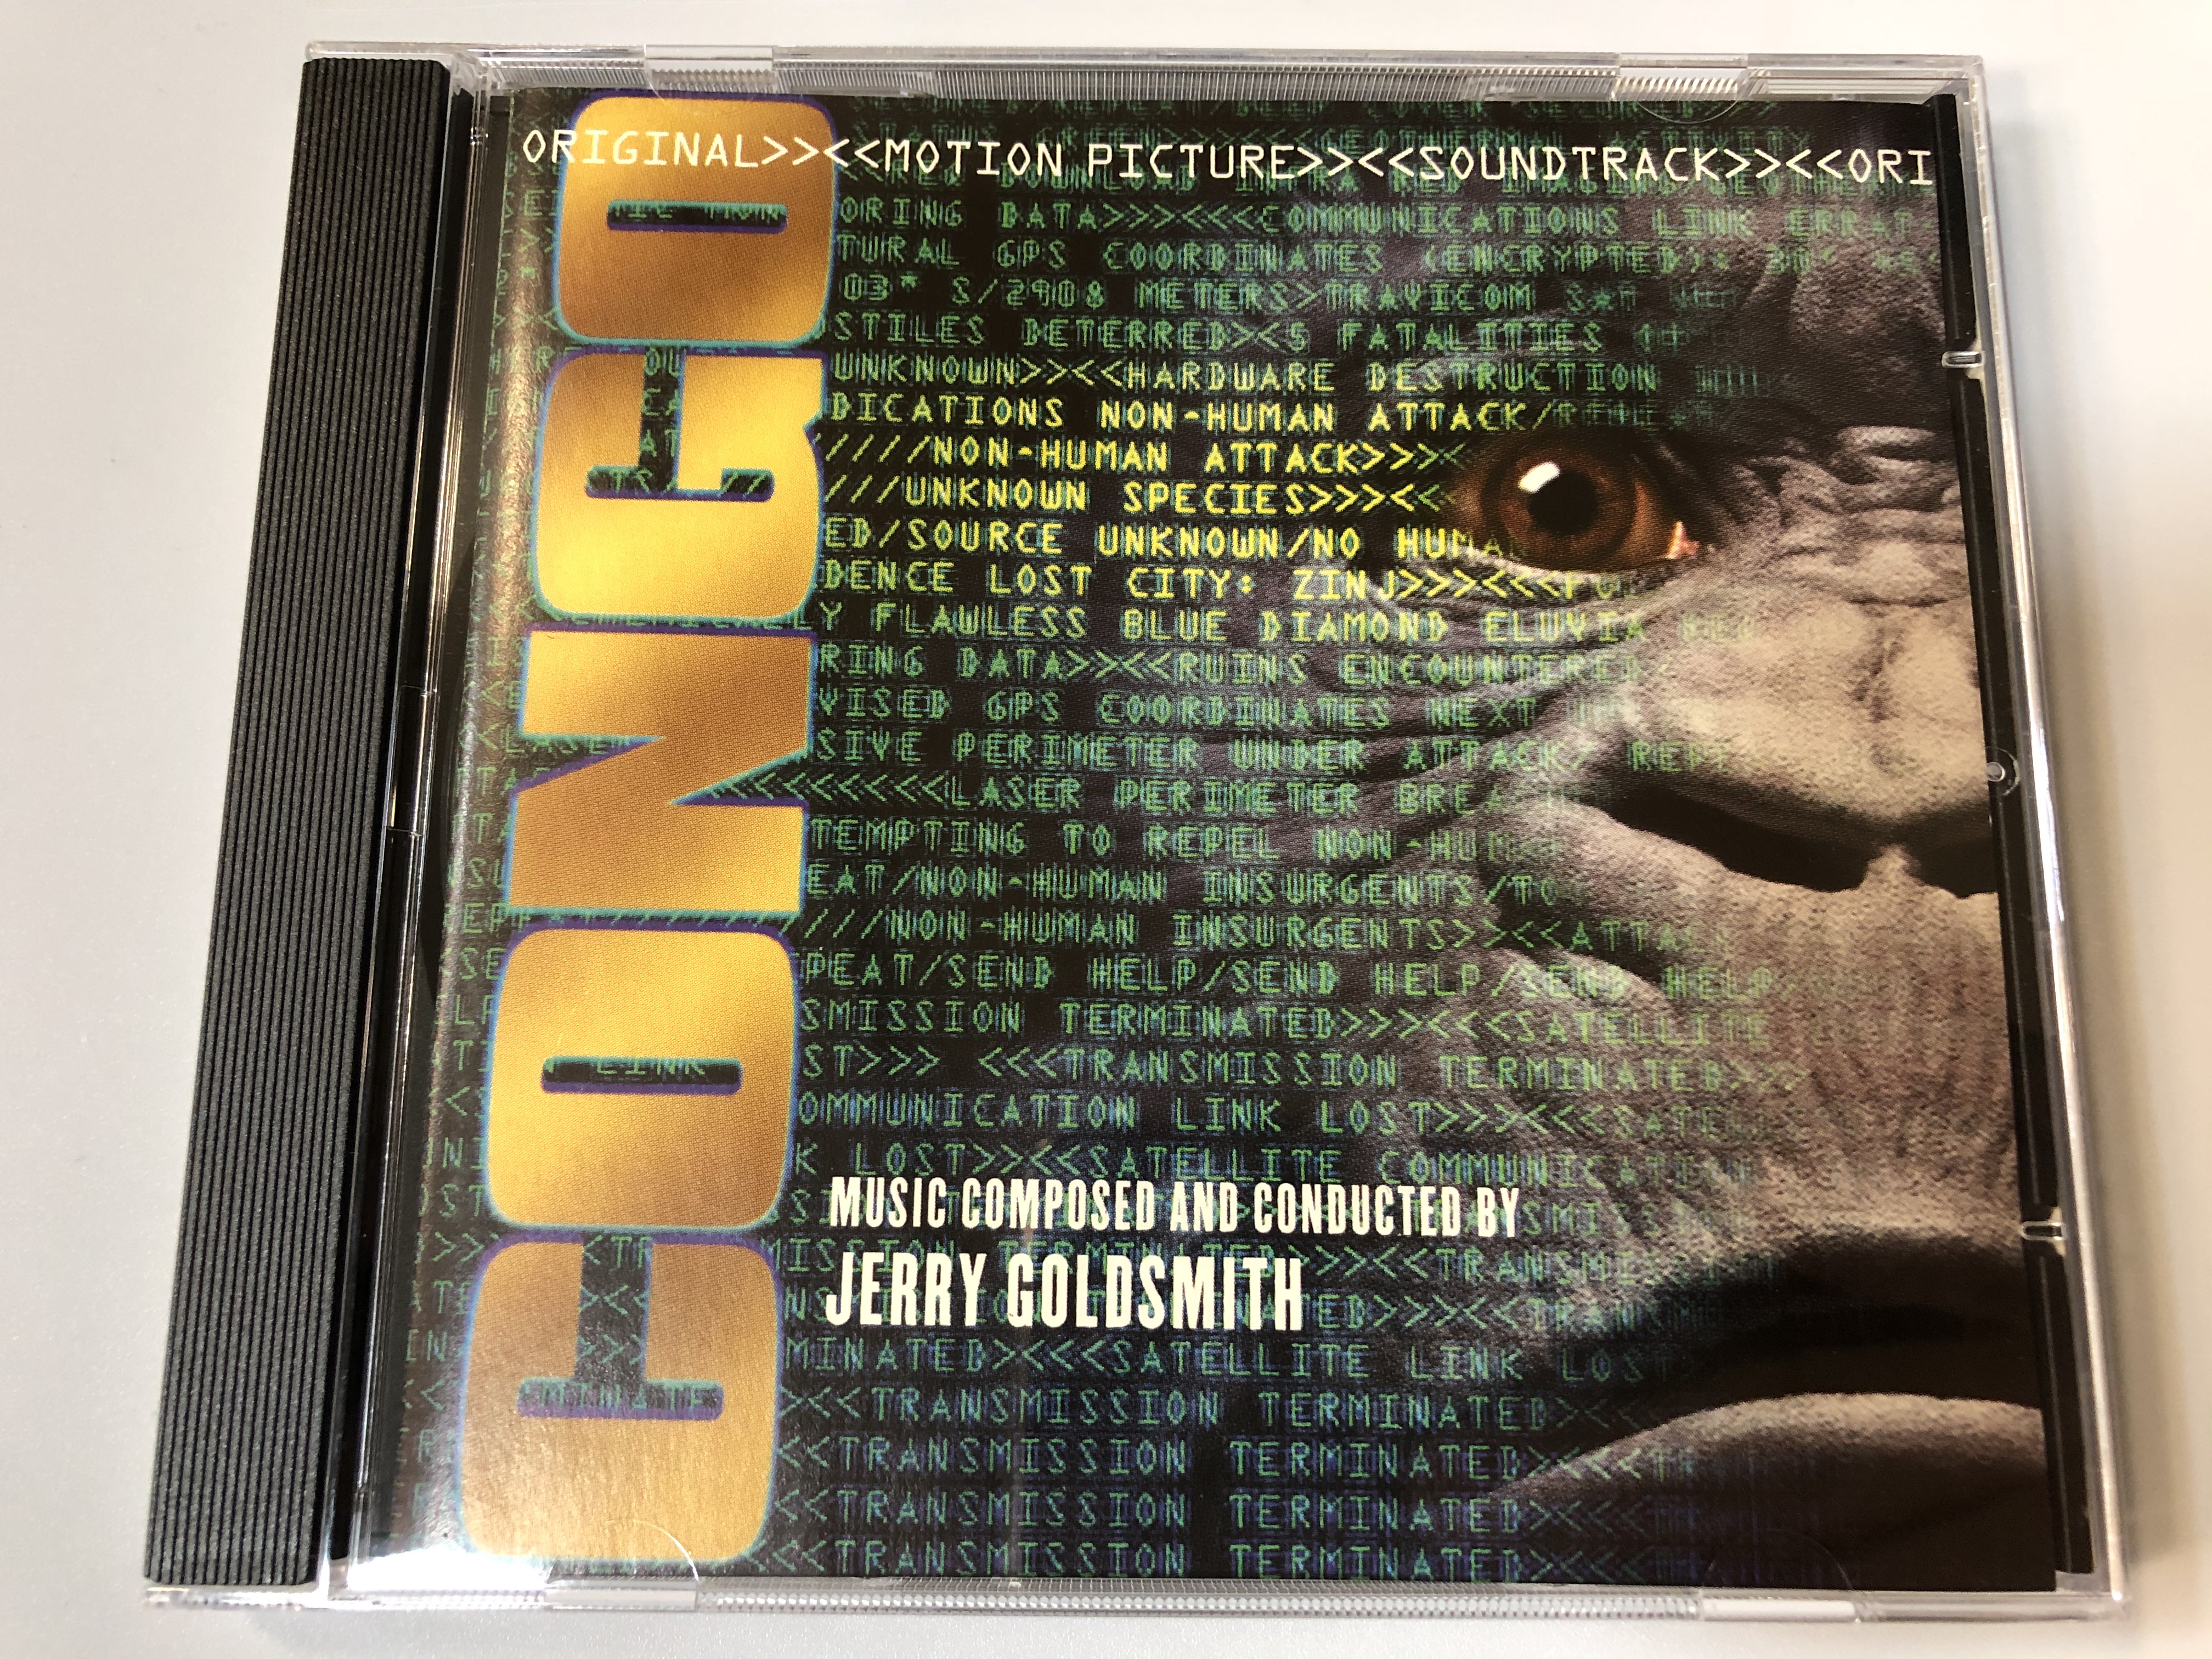 congo-original-motion-picture-soundtrack-music-composed-and-conducted-by-jerry-goldsmith-epic-soundtrax-audio-cd-1995-480938-2-1-.jpg